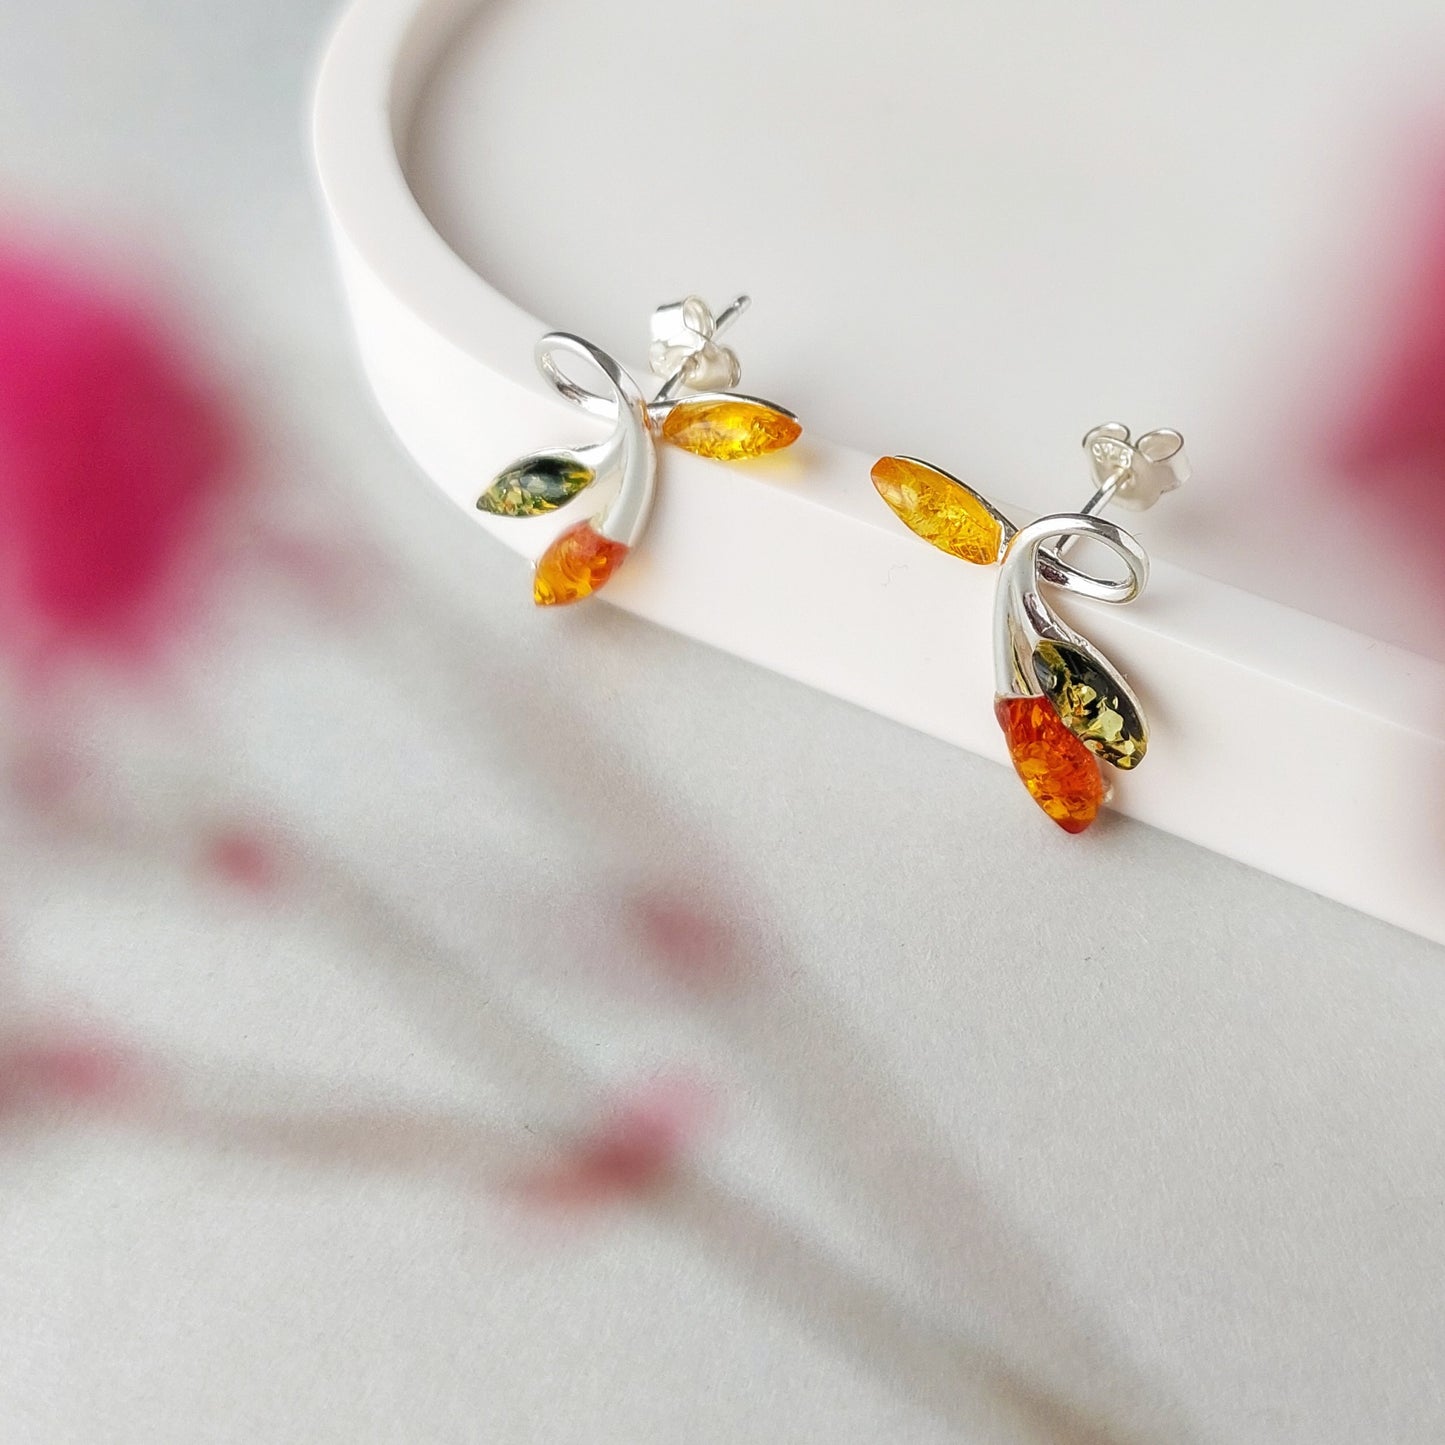 Colorful Amber Leaf Earrings, Sterling Silver Studs - Baltic Amber Jewelry Gift for Her